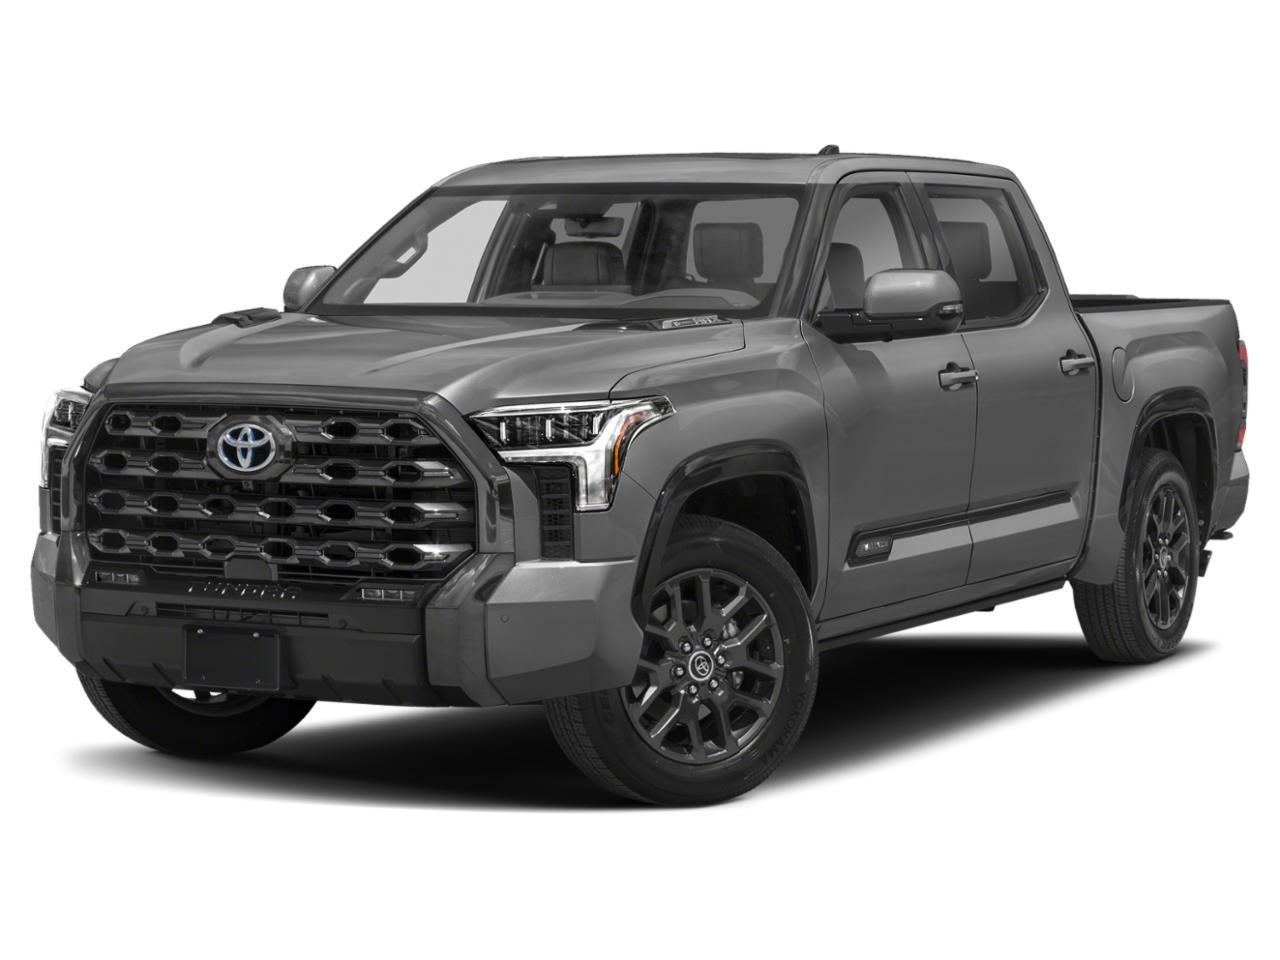 2024 Toyota Tundra 4x4 Crewmax Limited Hybrid - Factory Order